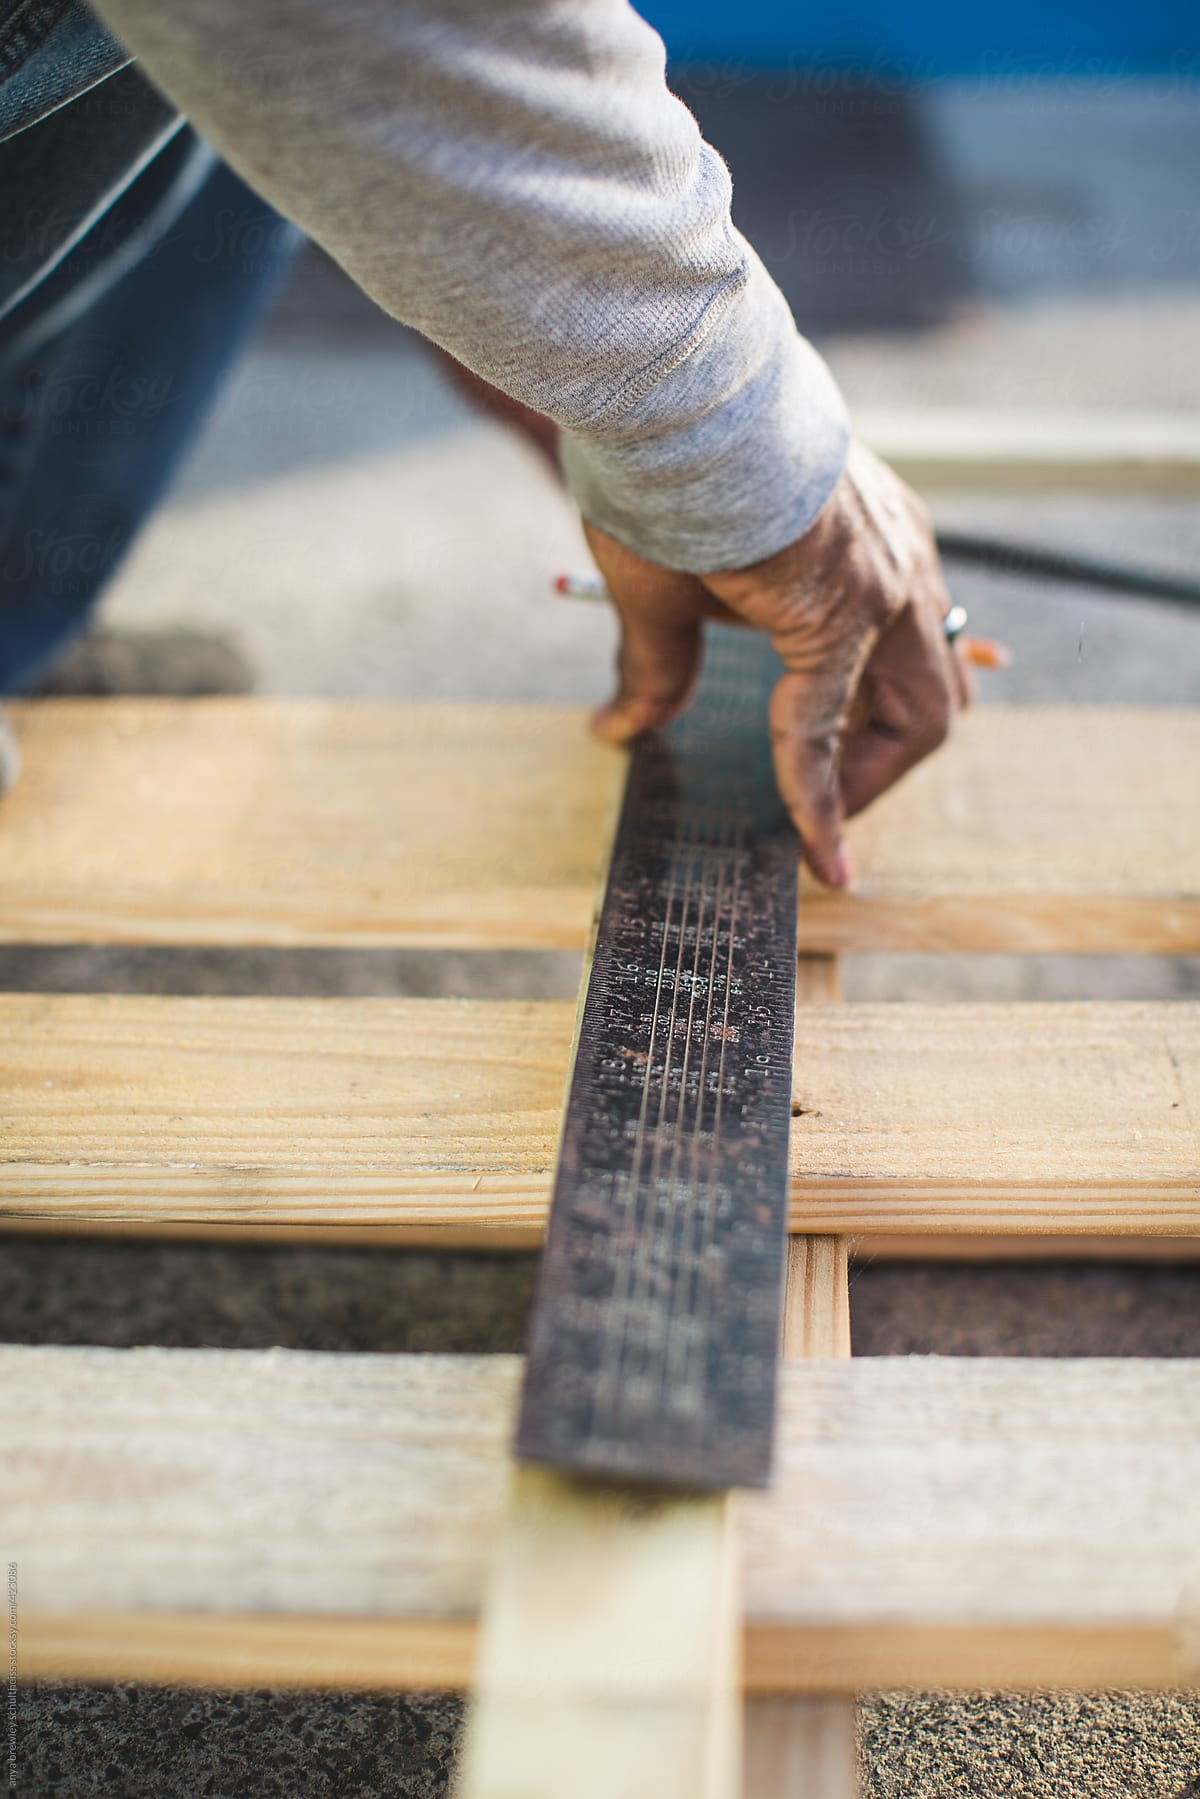 A man measuring a wooden pallet using a t square ruler